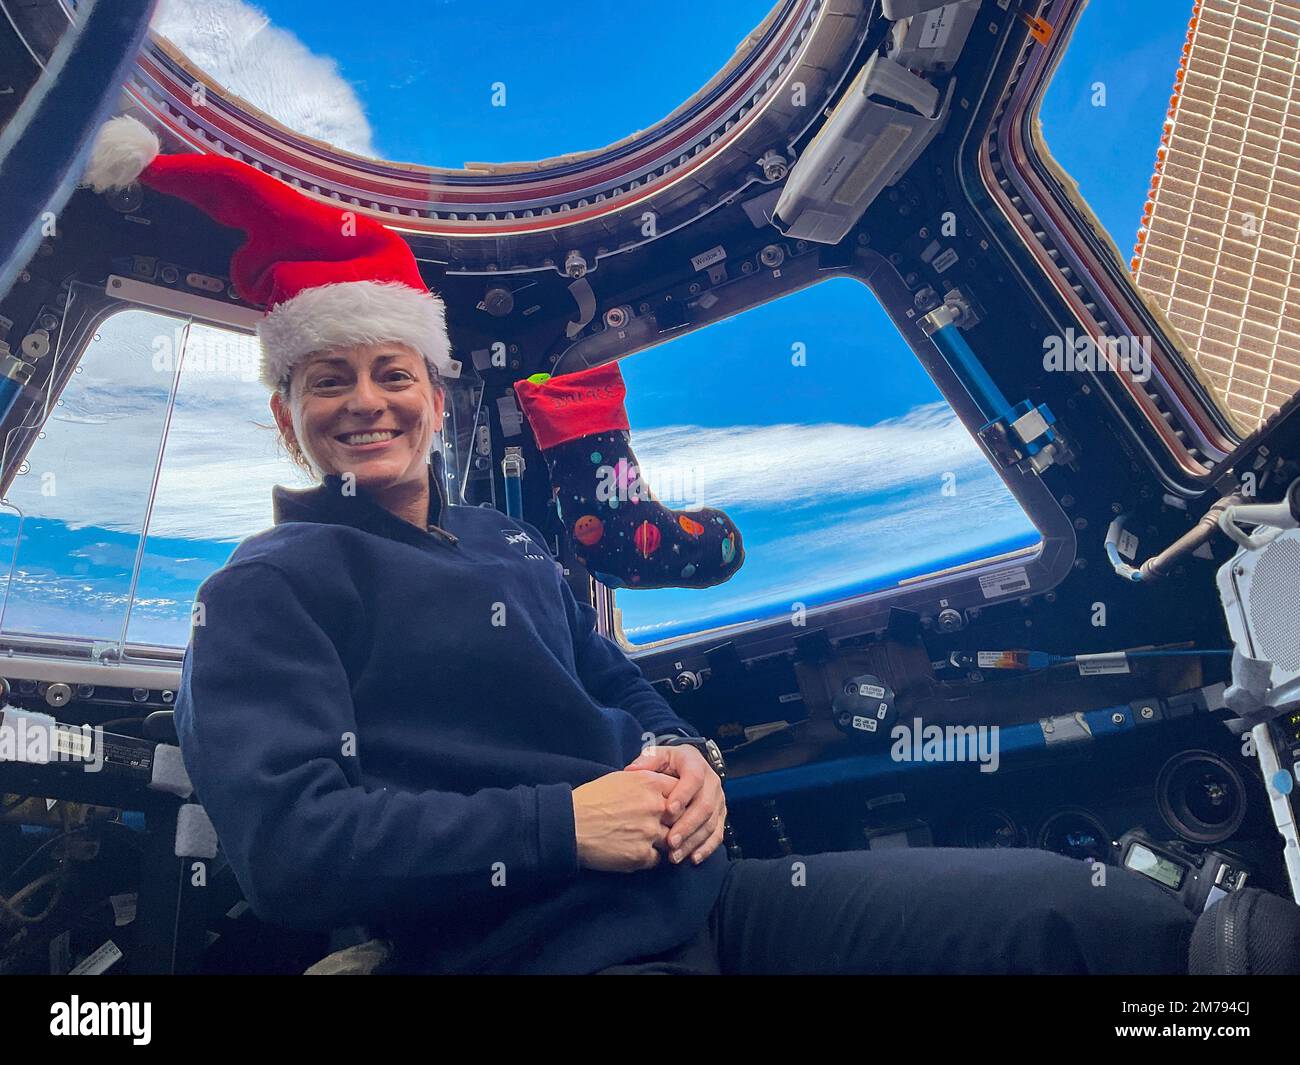 International Space Station, EARTH ORBIT. 24 December, 2022. NASA Expedition 68 NASA Flight Engineer, Nicole Mann, poses for a holiday portrait with her Christmas stocking on Christmas Eve inside the cupola of the International Space Station, December 25, 2022 in Earth Orbit. Mann, is the first Native American astronaut in space and the first to command a mission. Stock Photo